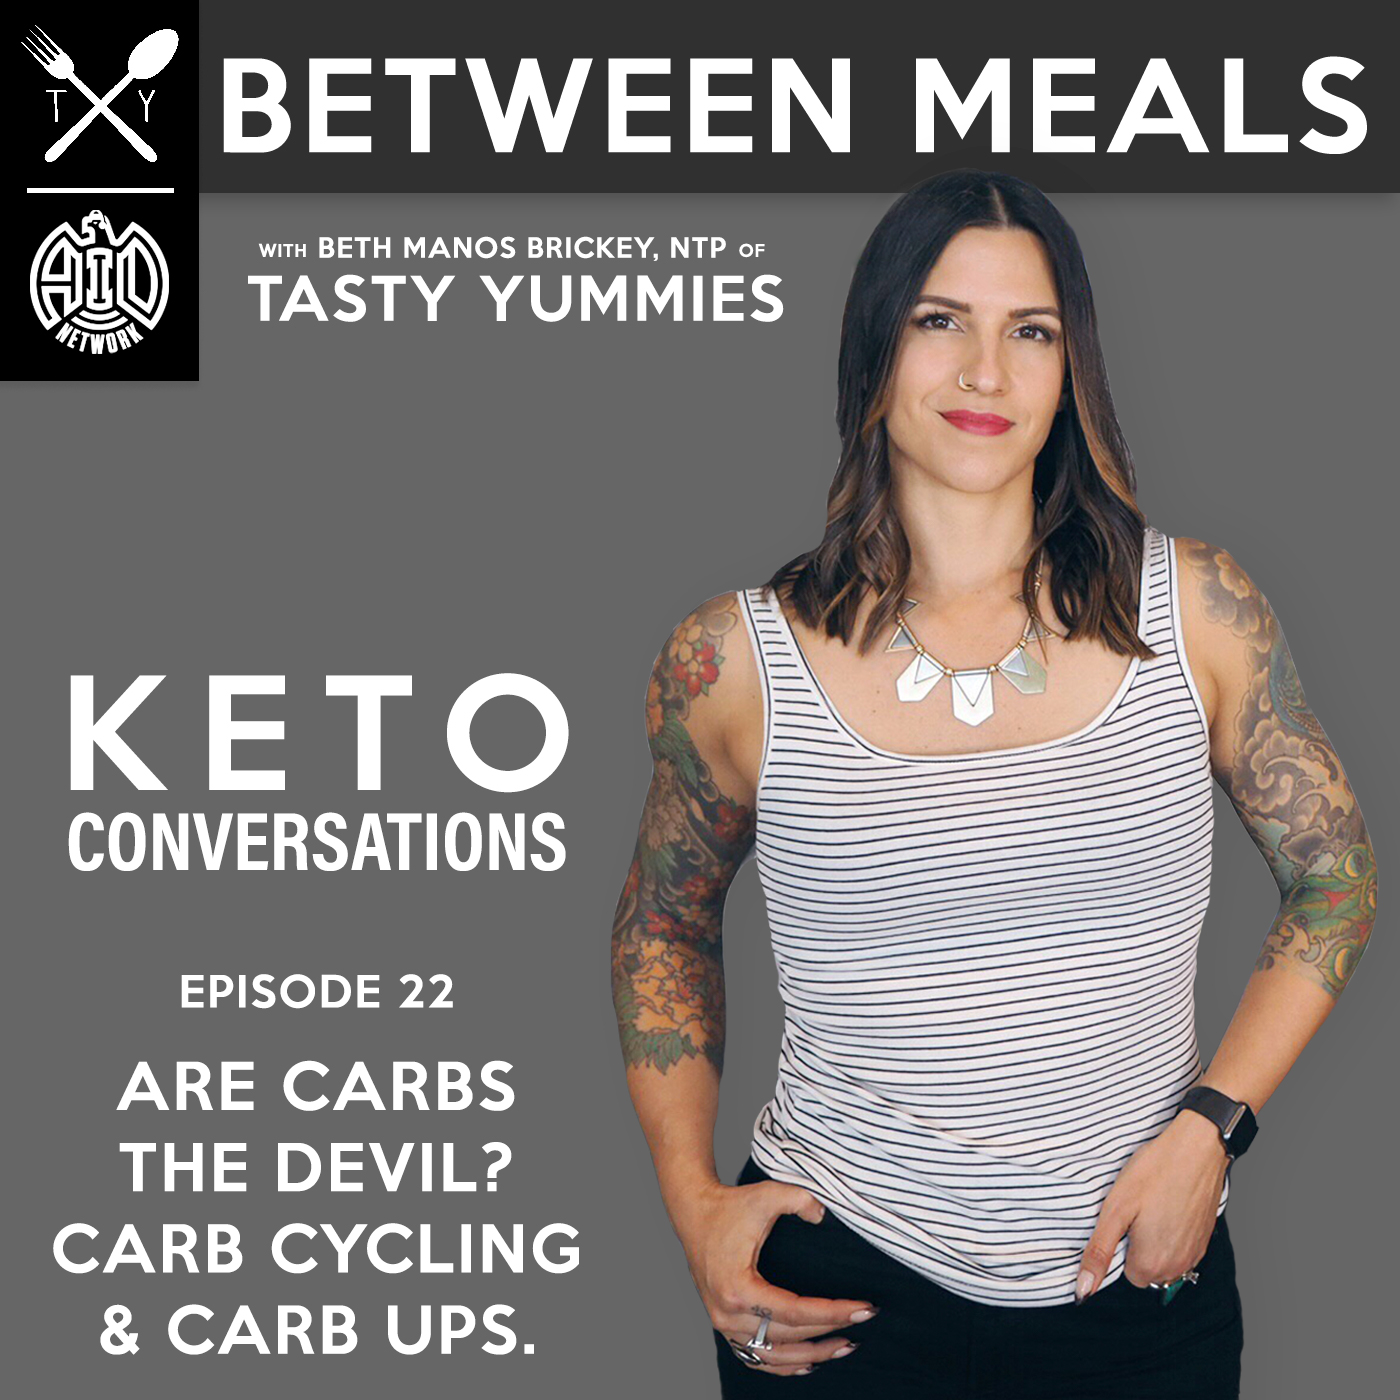 Between Meals Podcast. Episode 22: Are Carbs the Devil" Carb Cycling & Carb Ups.